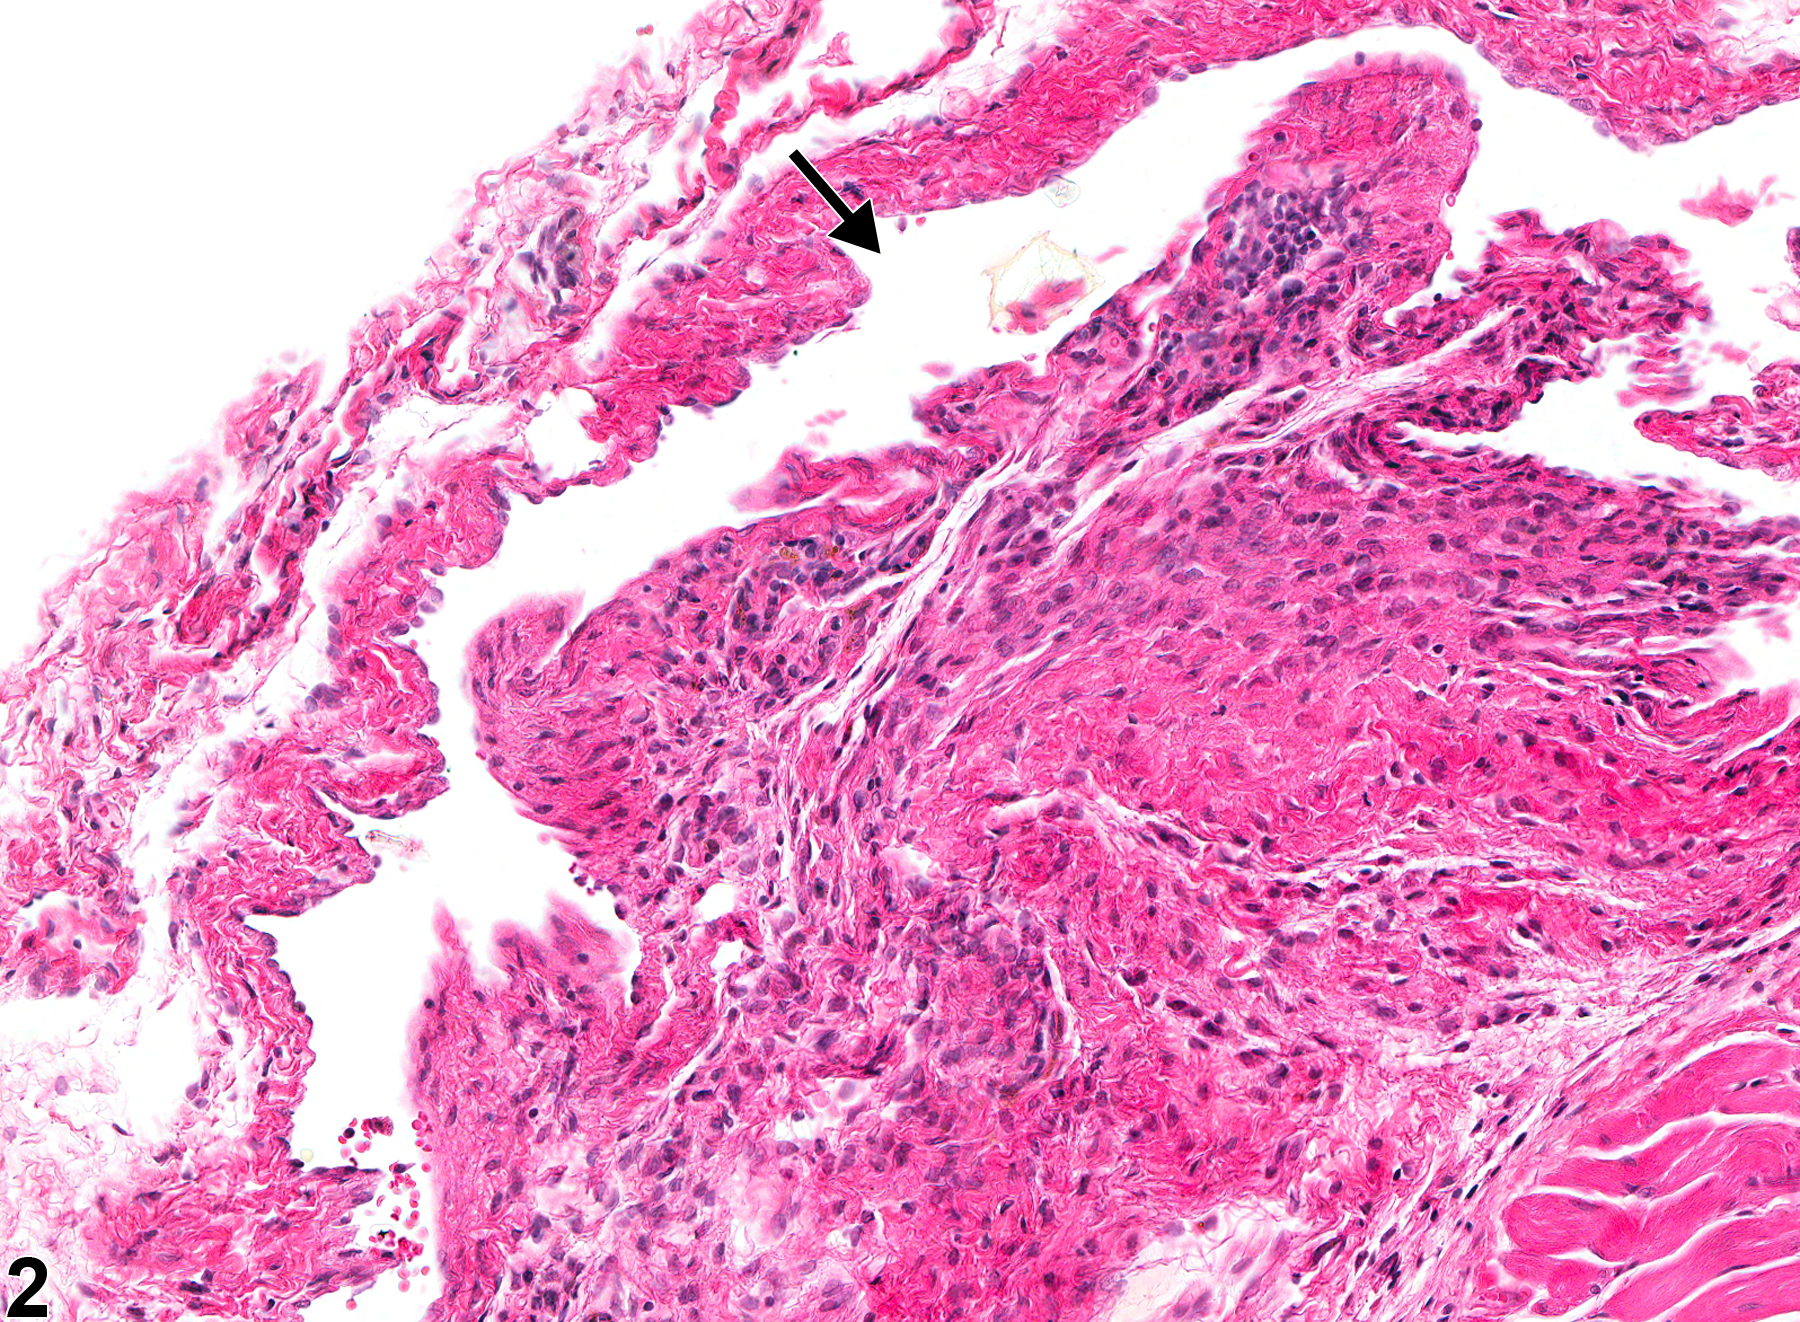 Image of angiectasis in the esophagus from a female F344/N rat in a chronic study